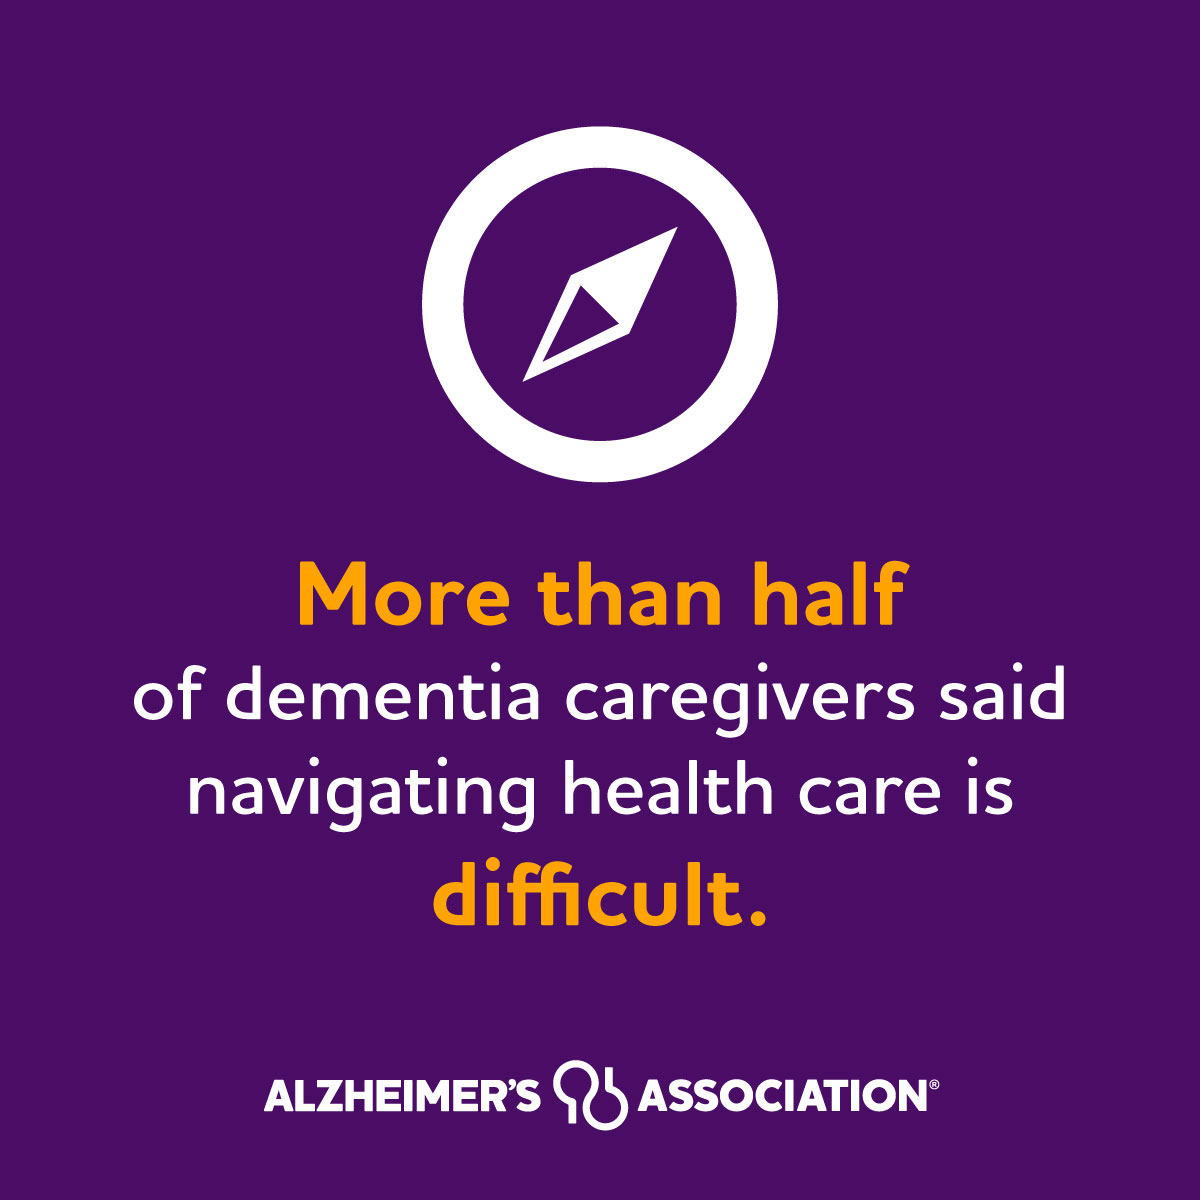 Caring for a loved one with Alzheimer’s or other dementia can be overwhelming. Navigating our health care system shouldn’t be. Share the facts: alz.org/facts.